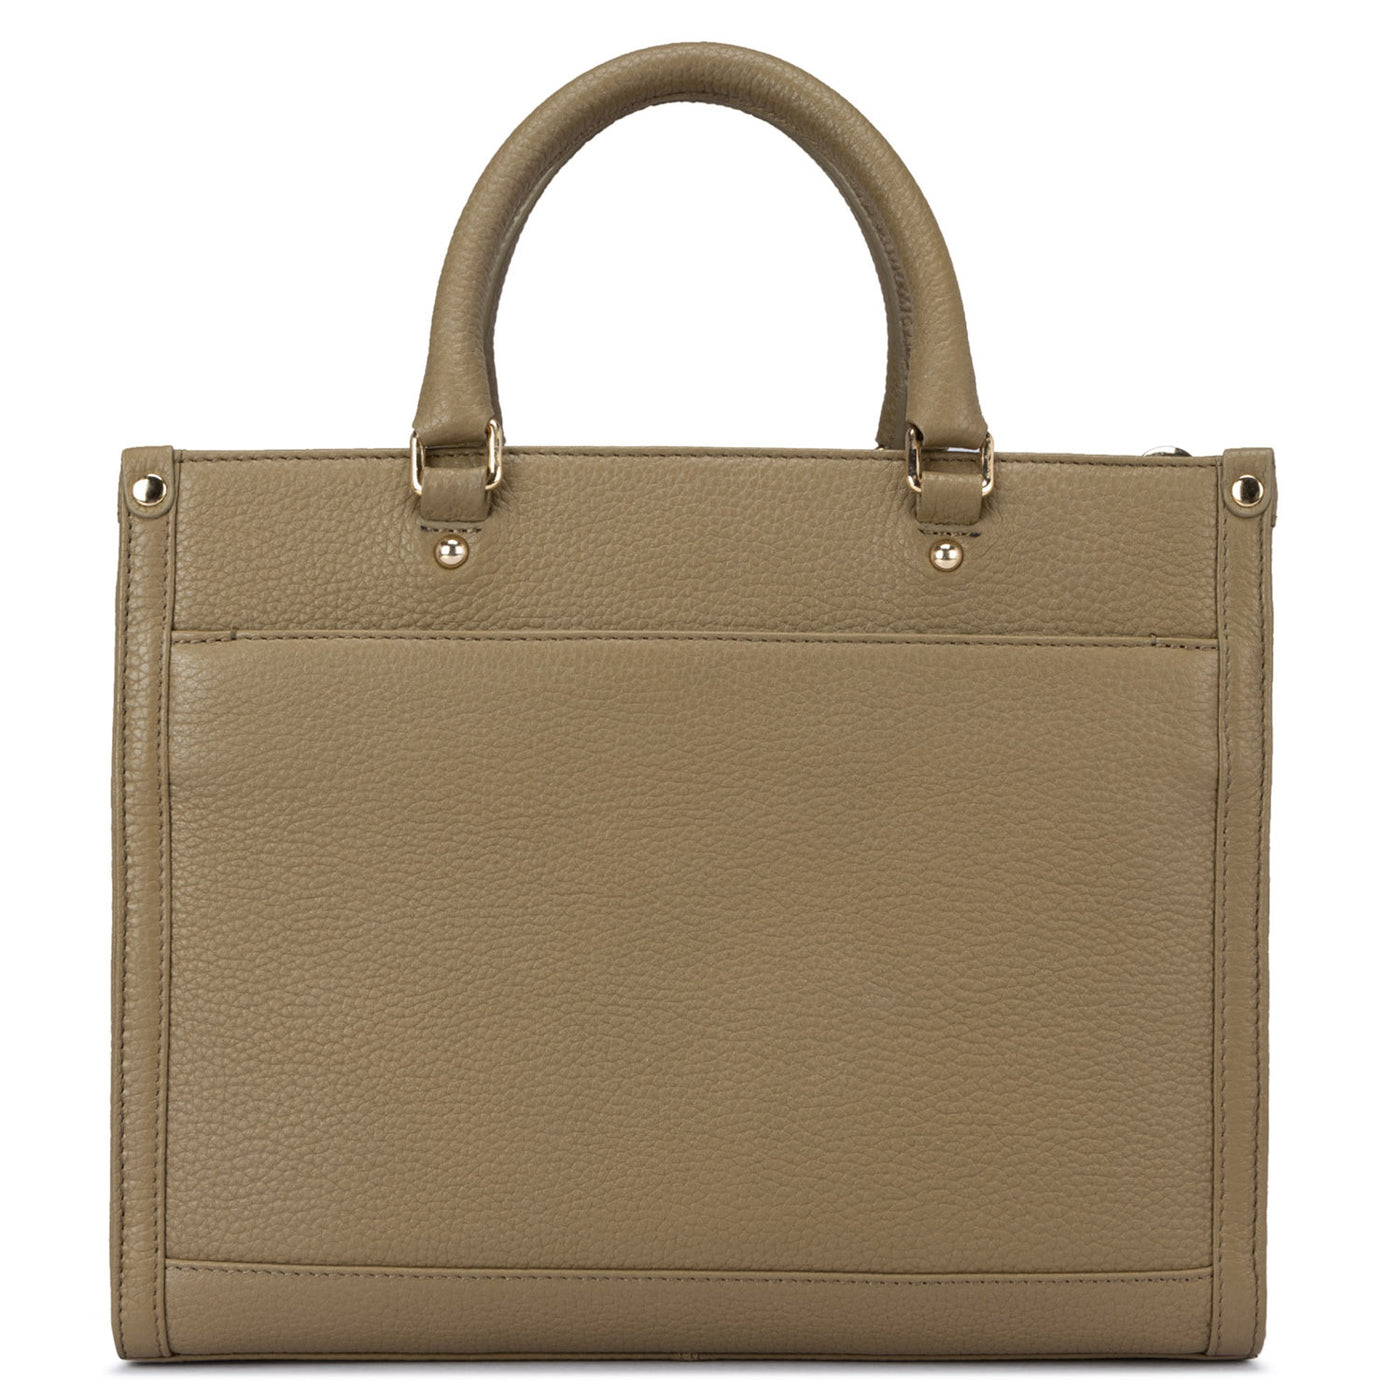 Medium Wax Leather Book Tote - Olive